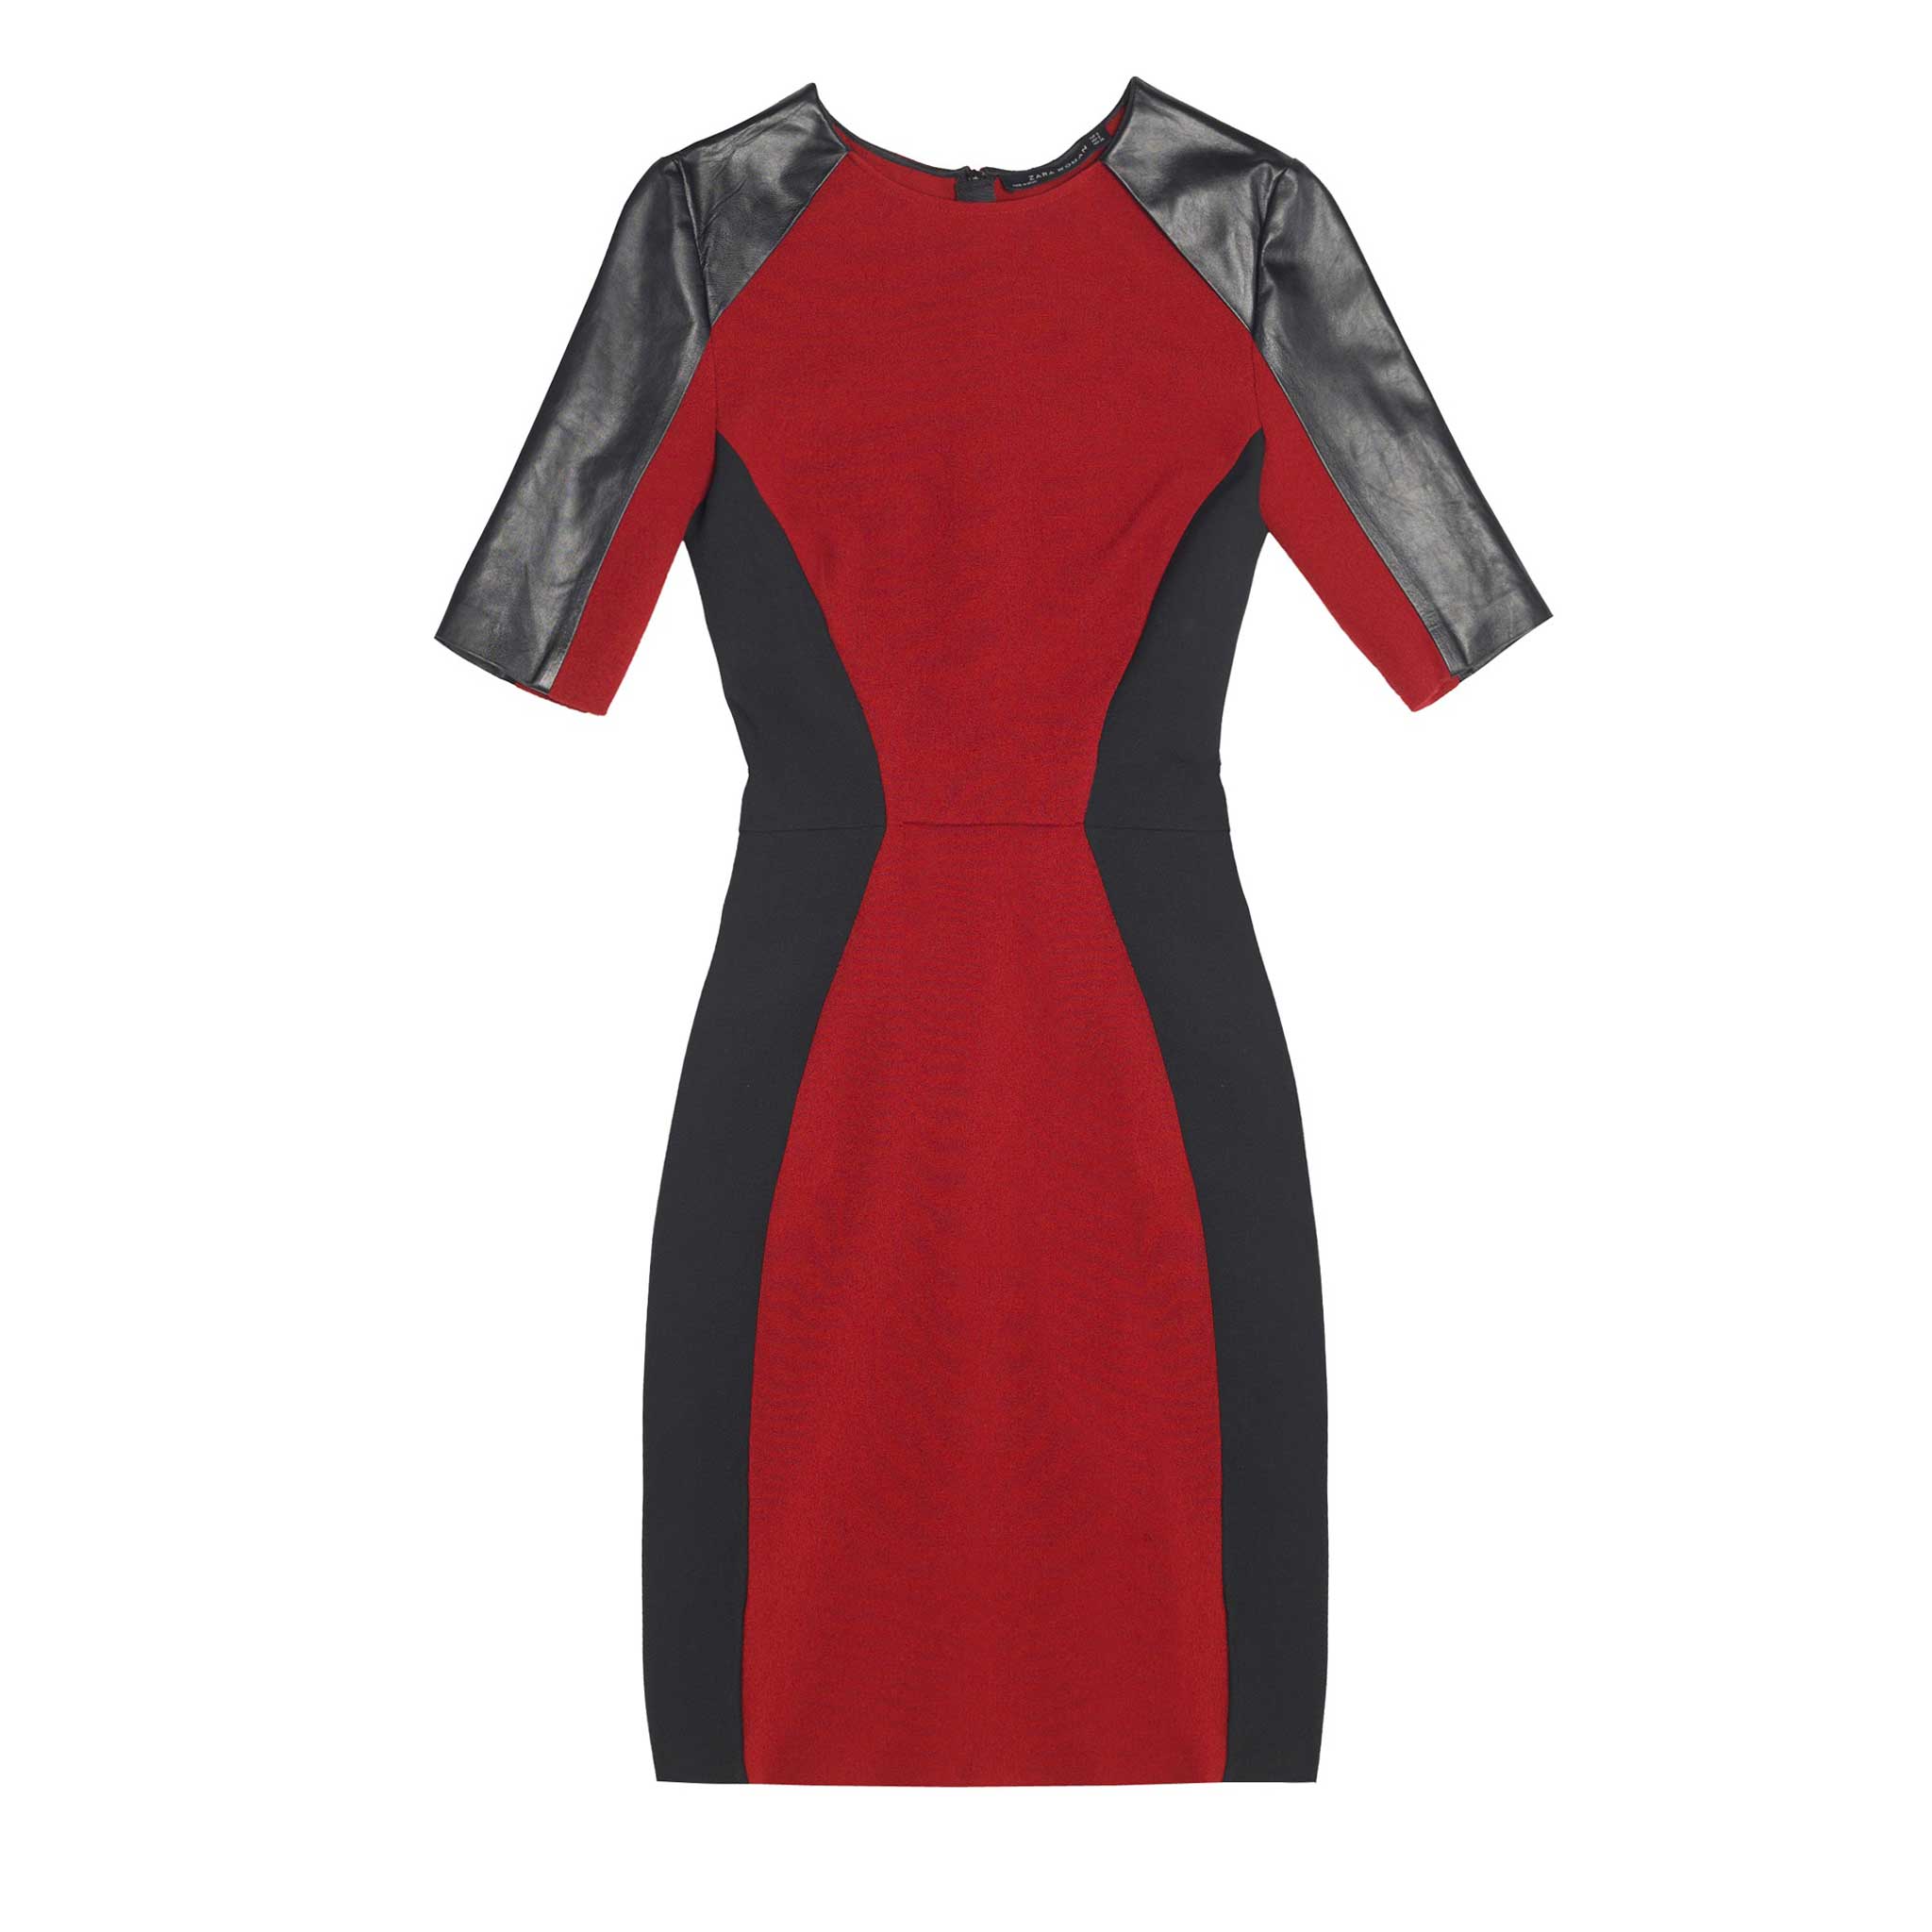 Zara's modern-looking black and red dress with leather sleeves, £69.99, zara.com